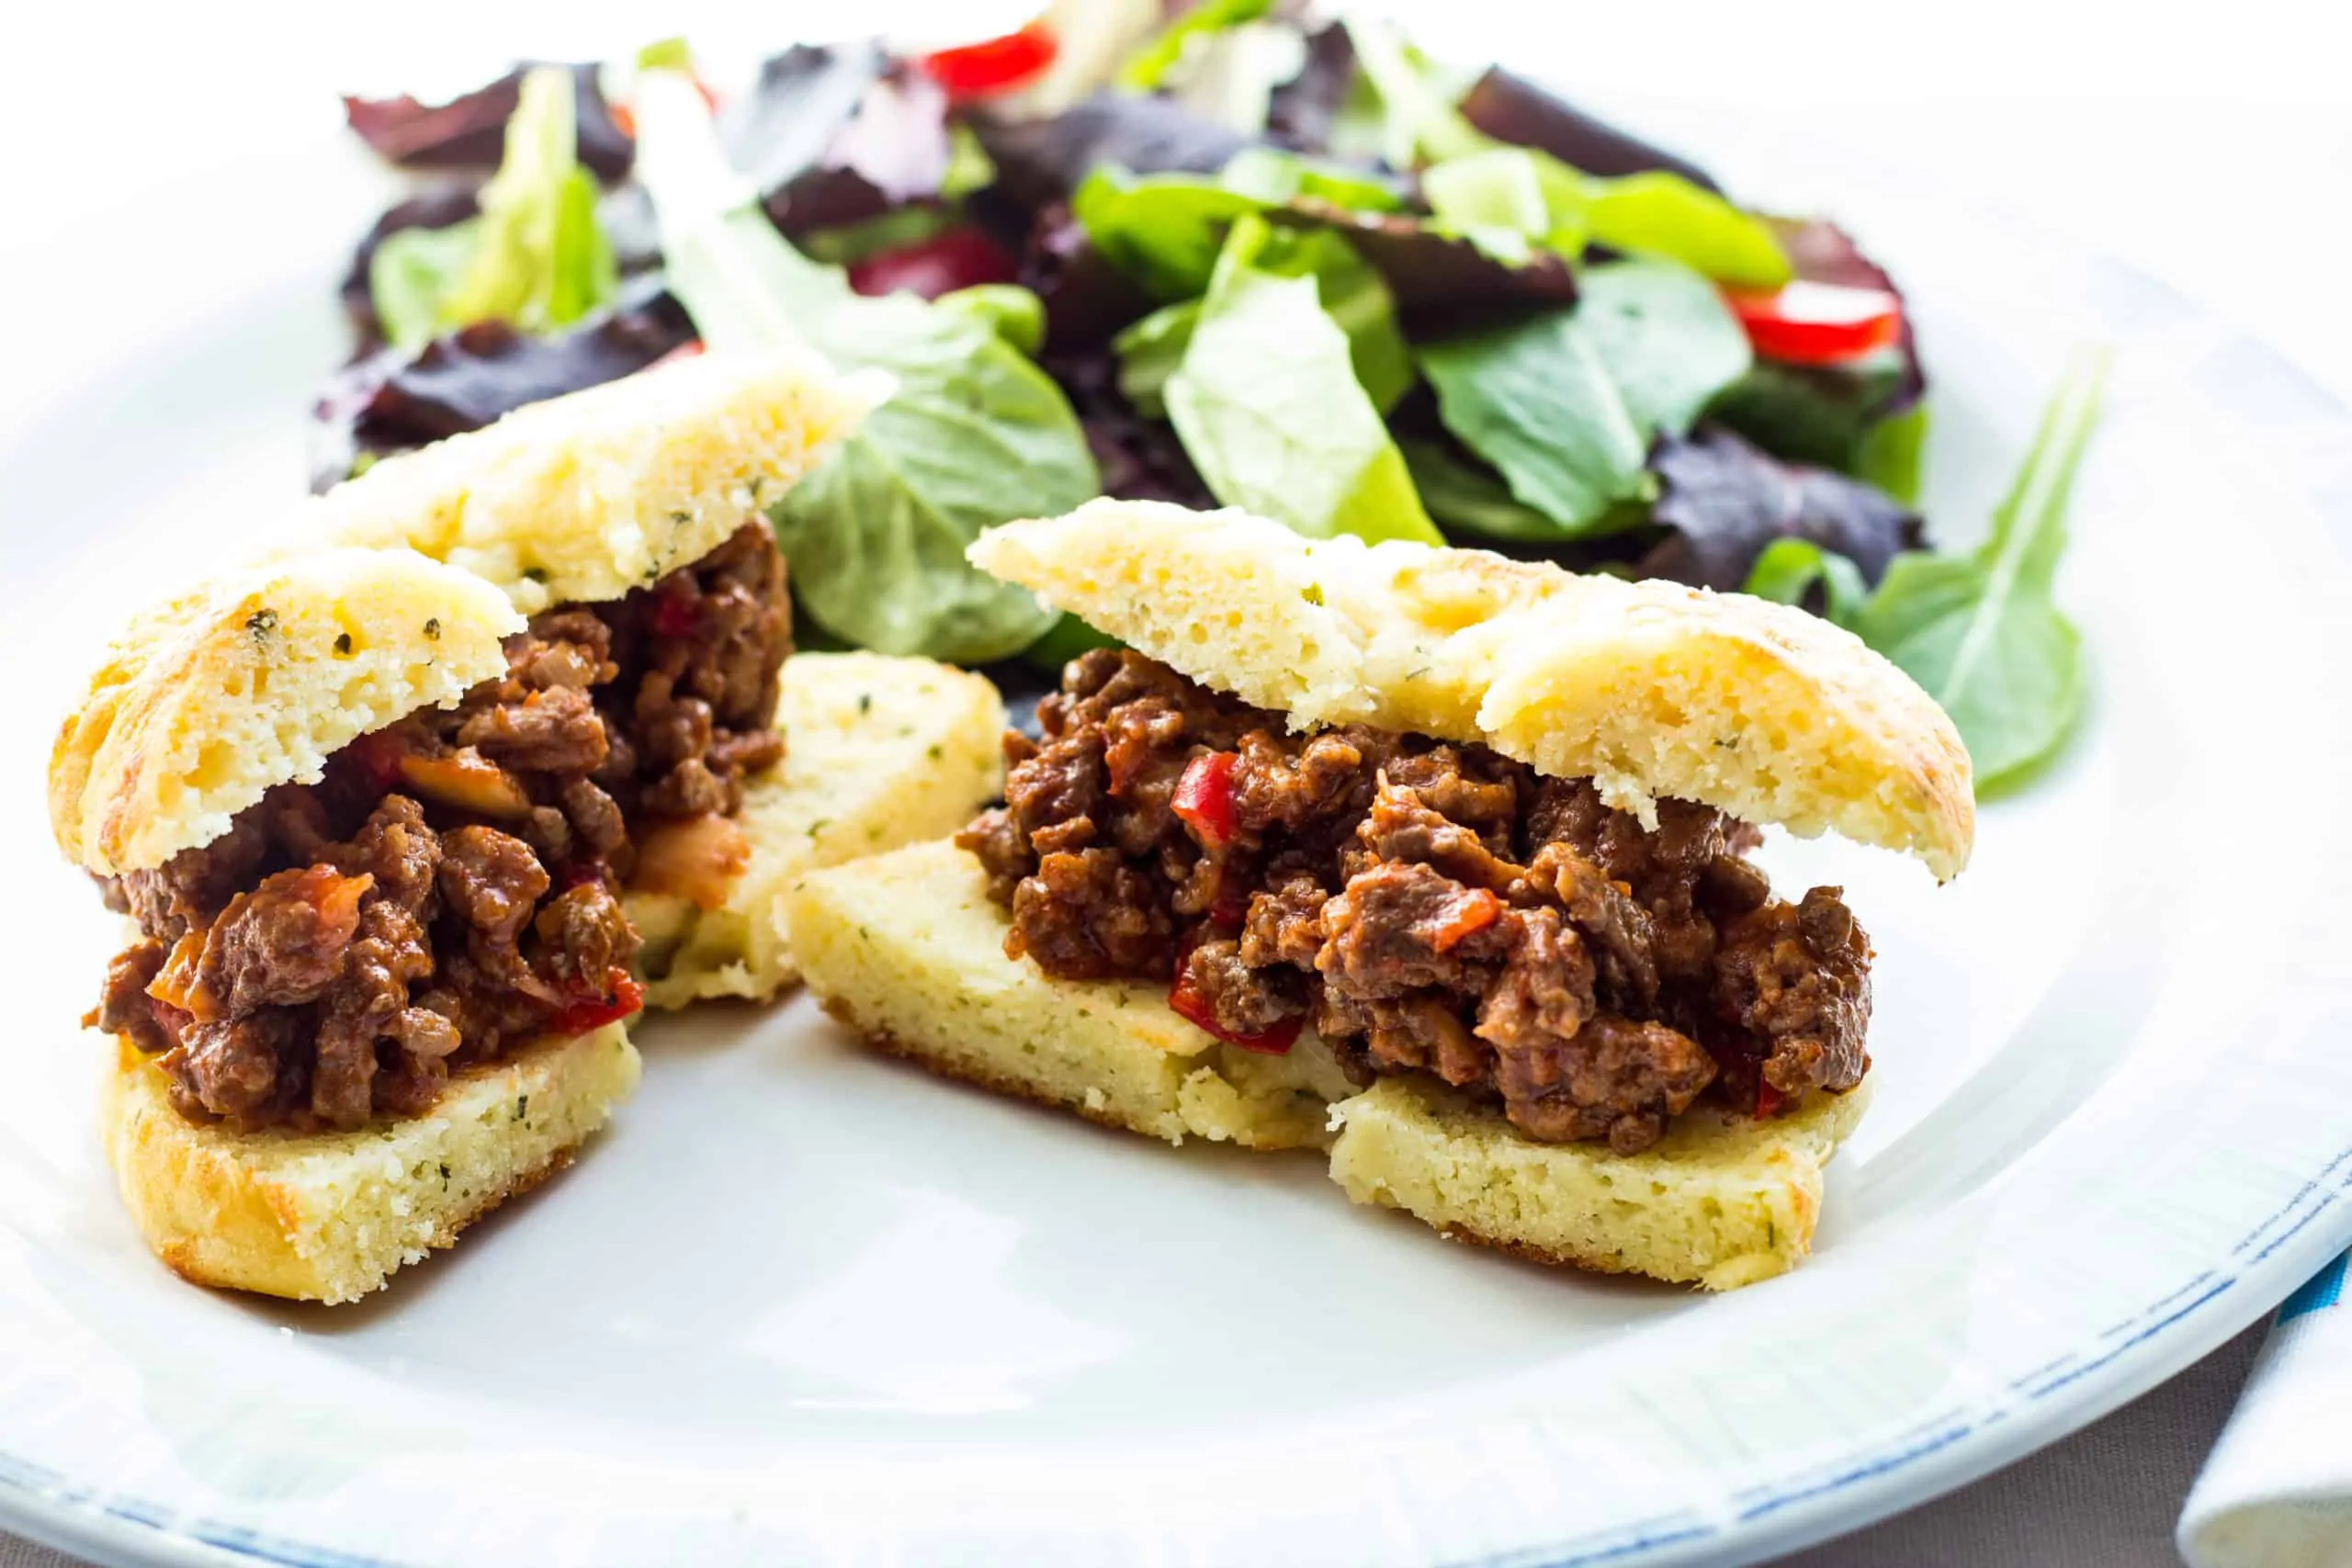 Easy and tasty Keto Sloppy Joes are on the table in under 30!